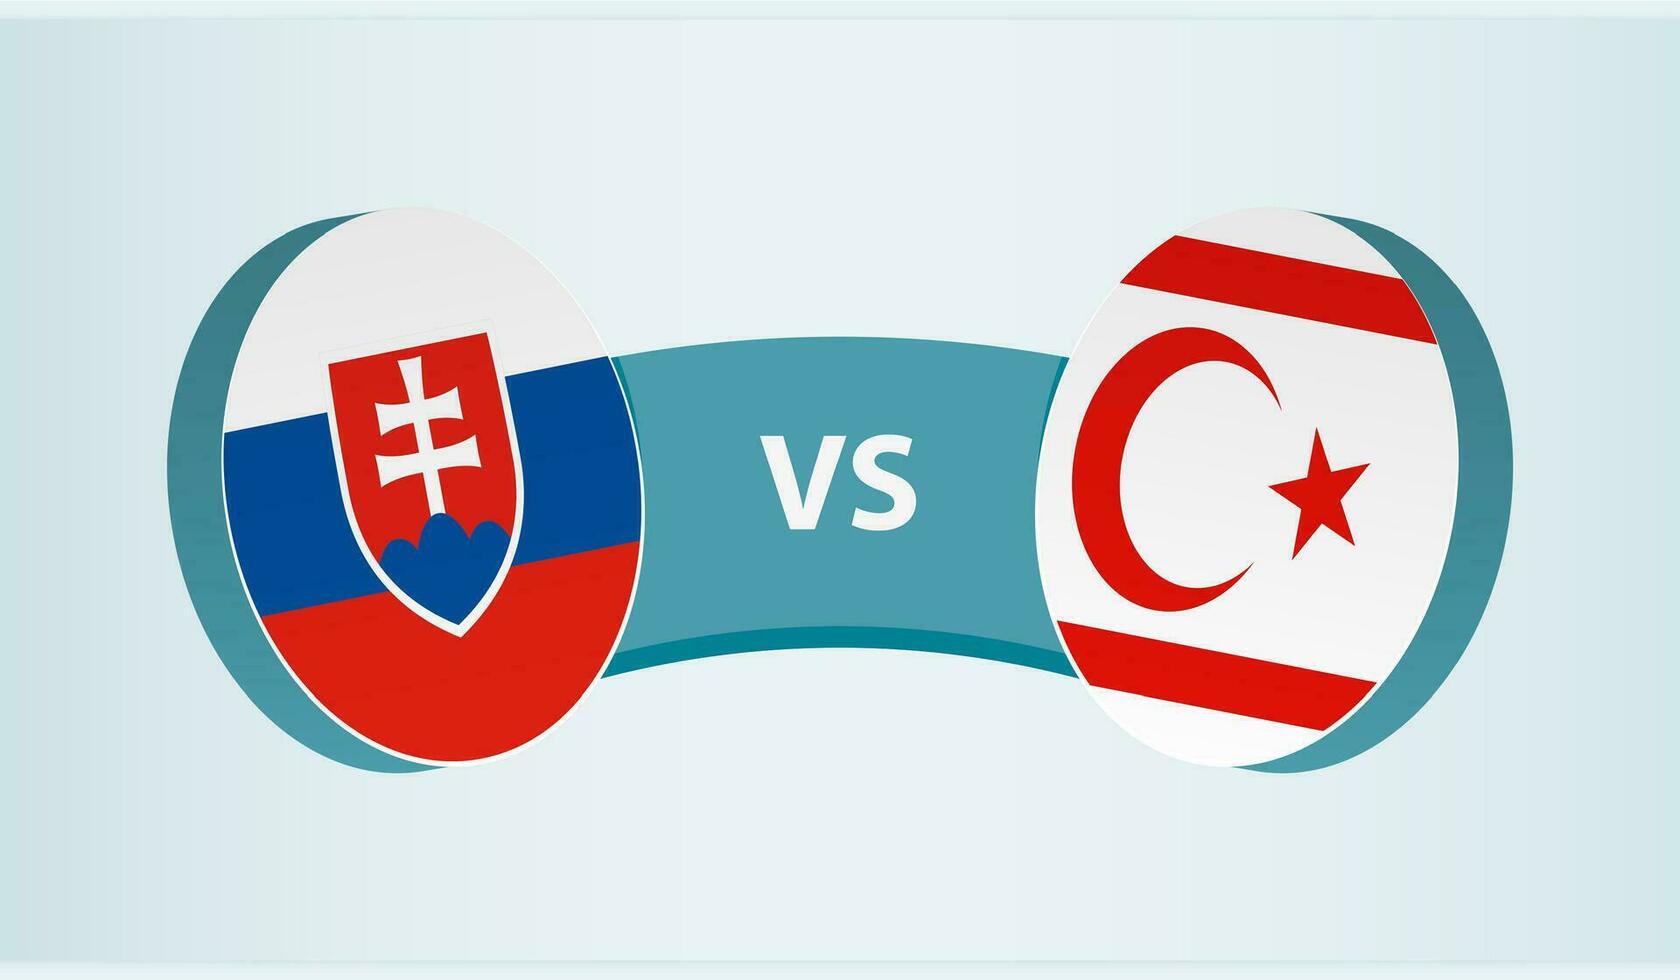 Slovakia versus Northern Cyprus, team sports competition concept. vector